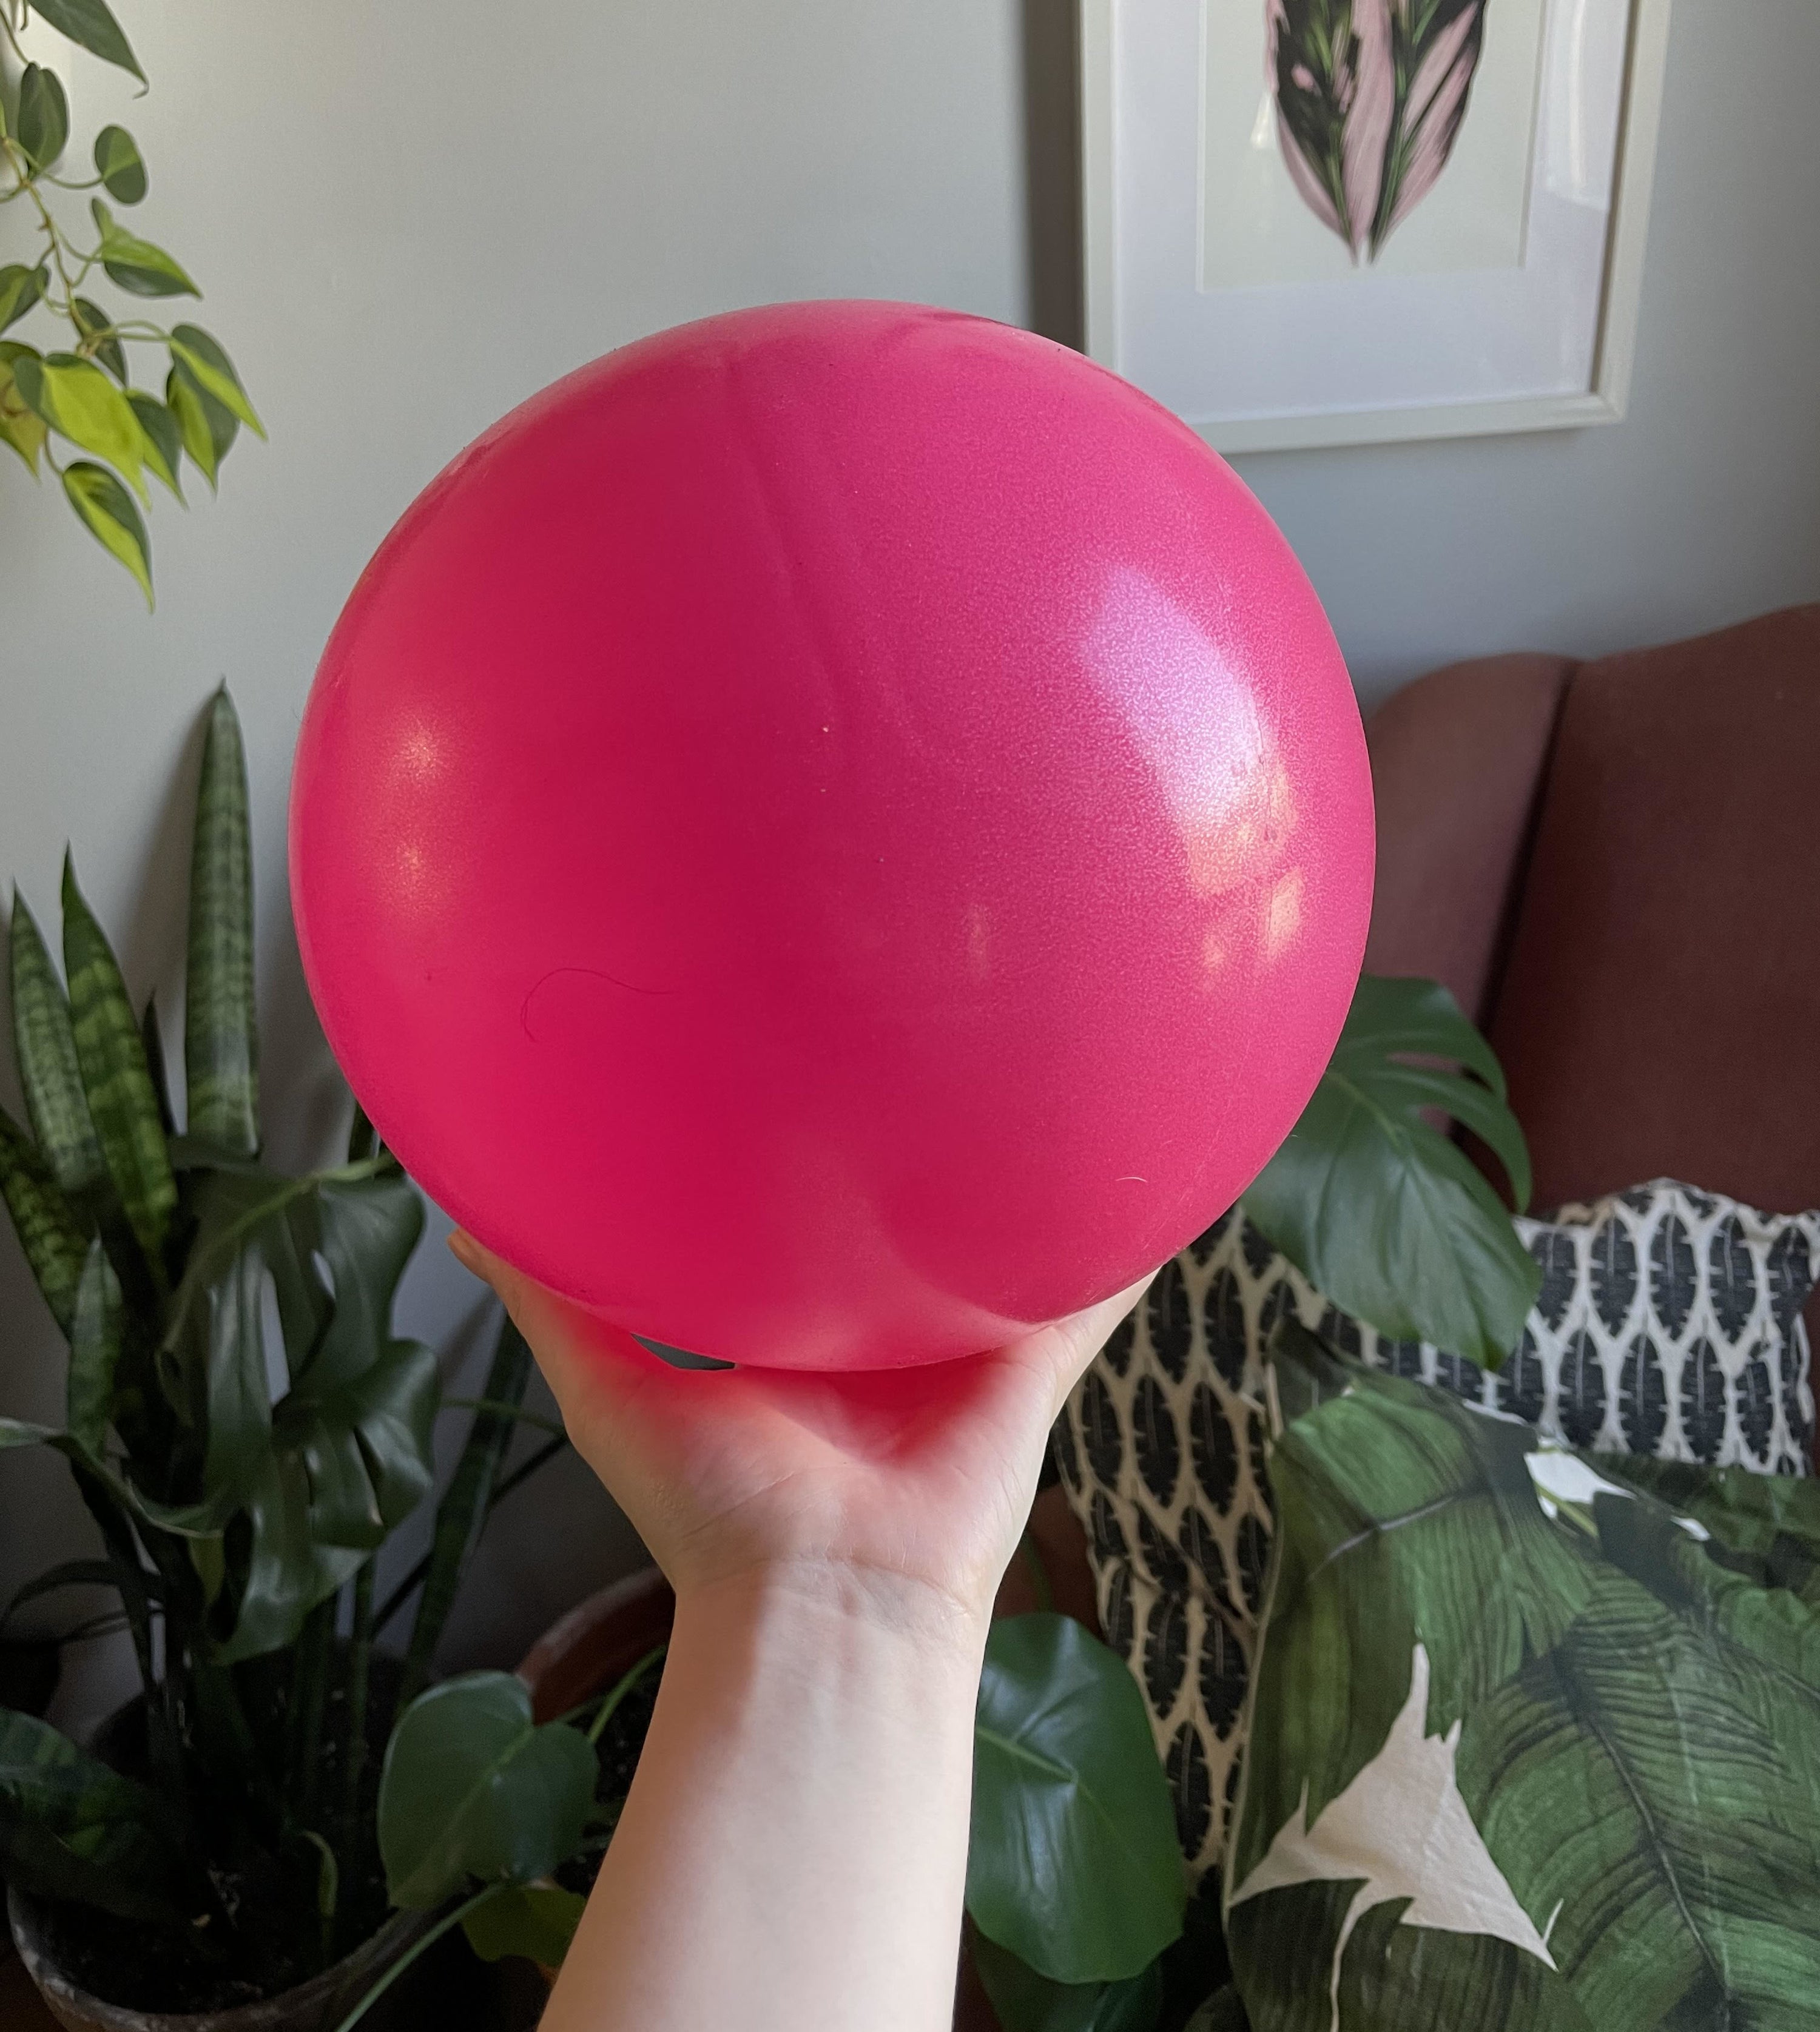 A person holding the pilates ball